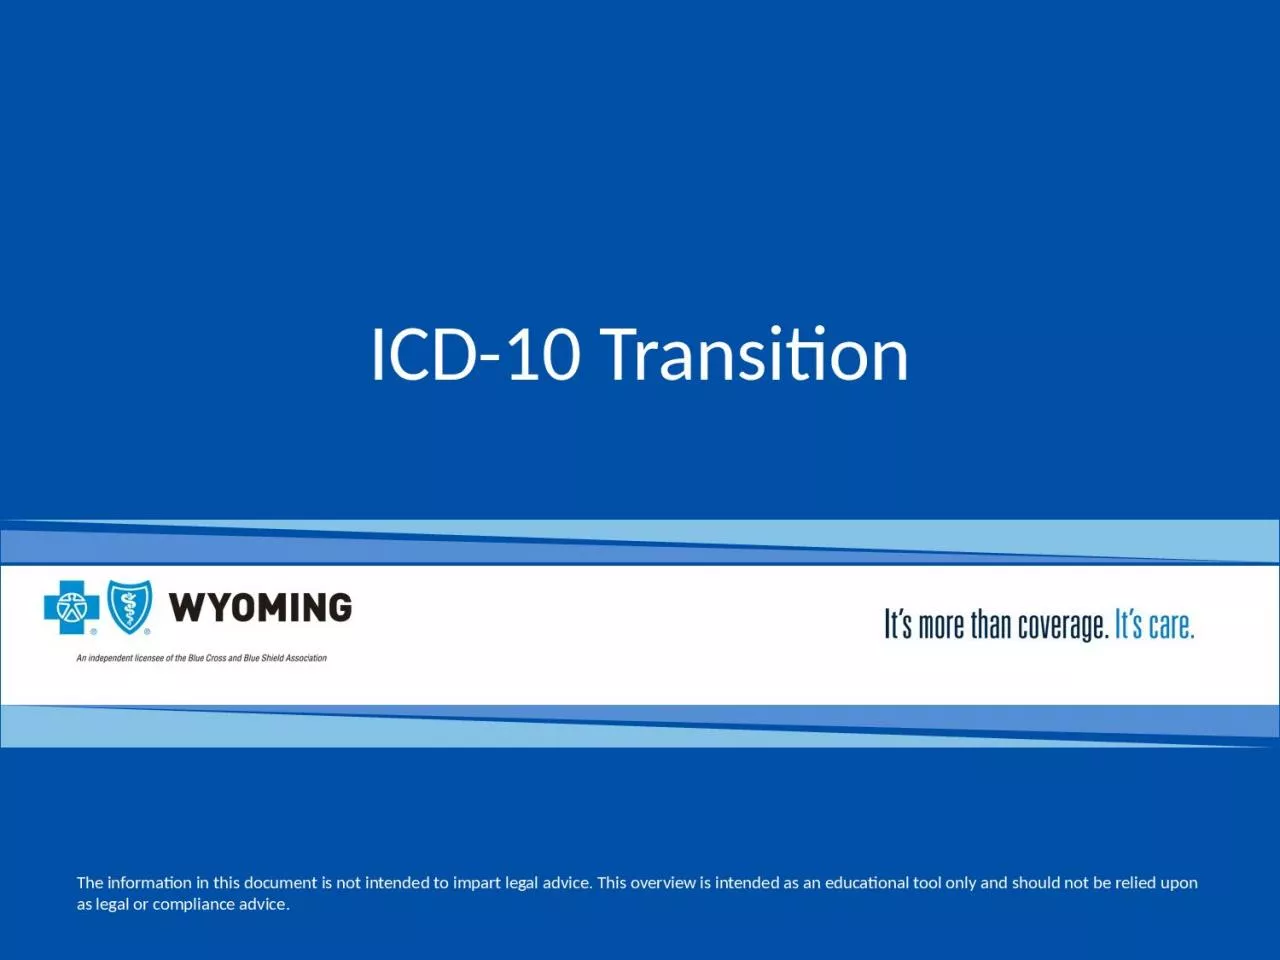 ICD-10 Transition   The information in this document is not intended to impart legal advice. This